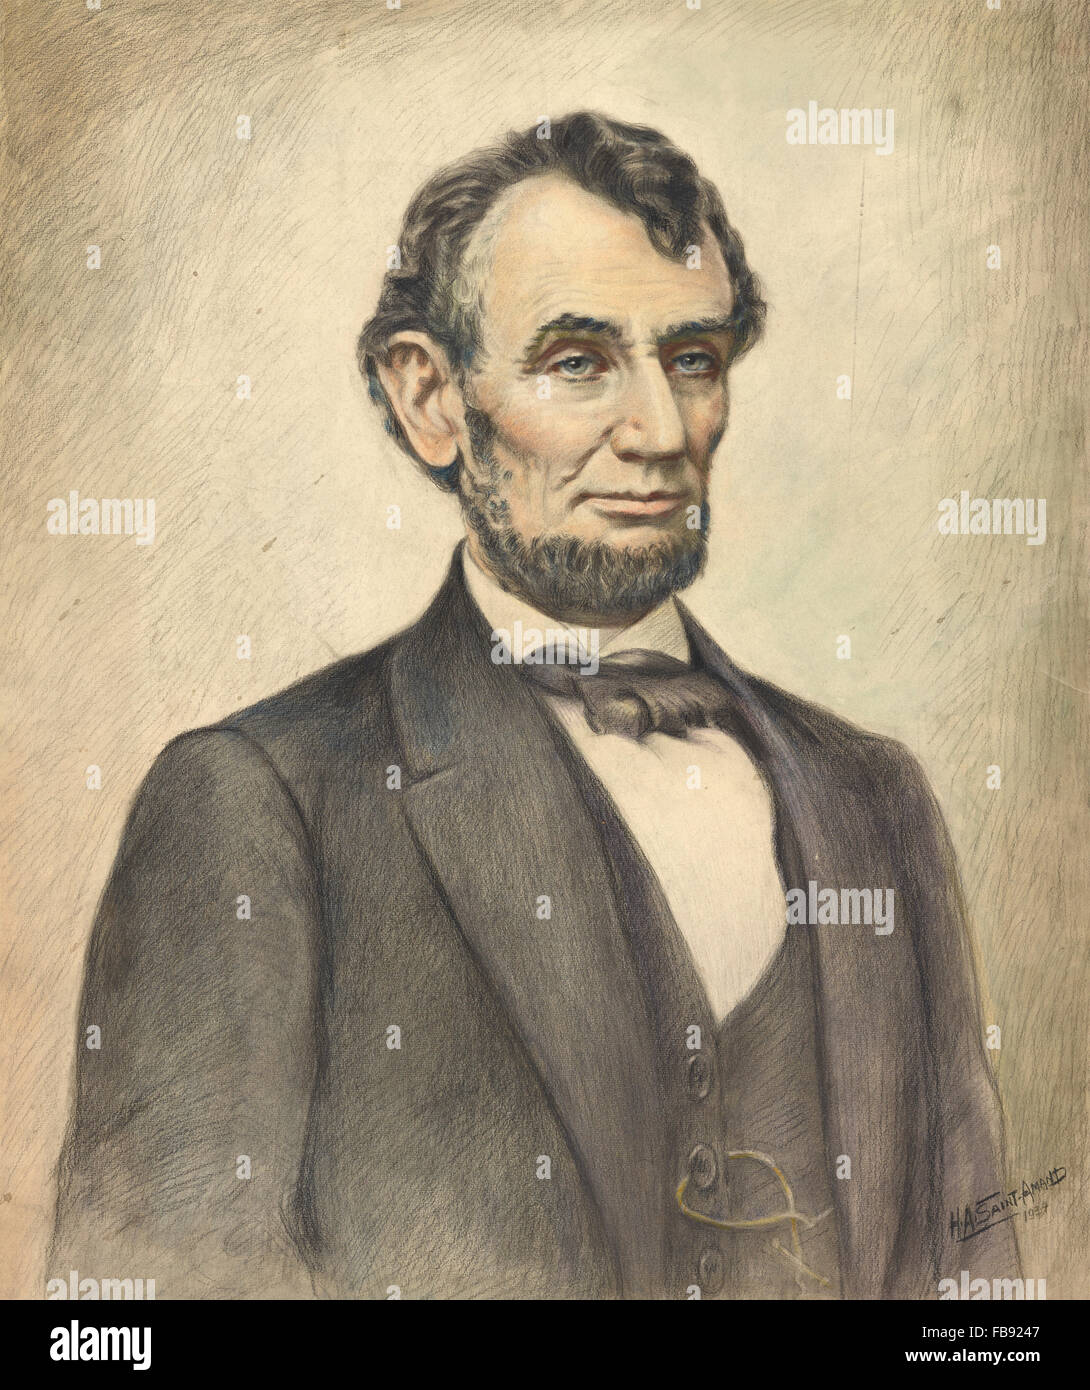 Pencil sketch of President Abraham Lincoln by H A Saint-Amand c 1934 Stock Photo